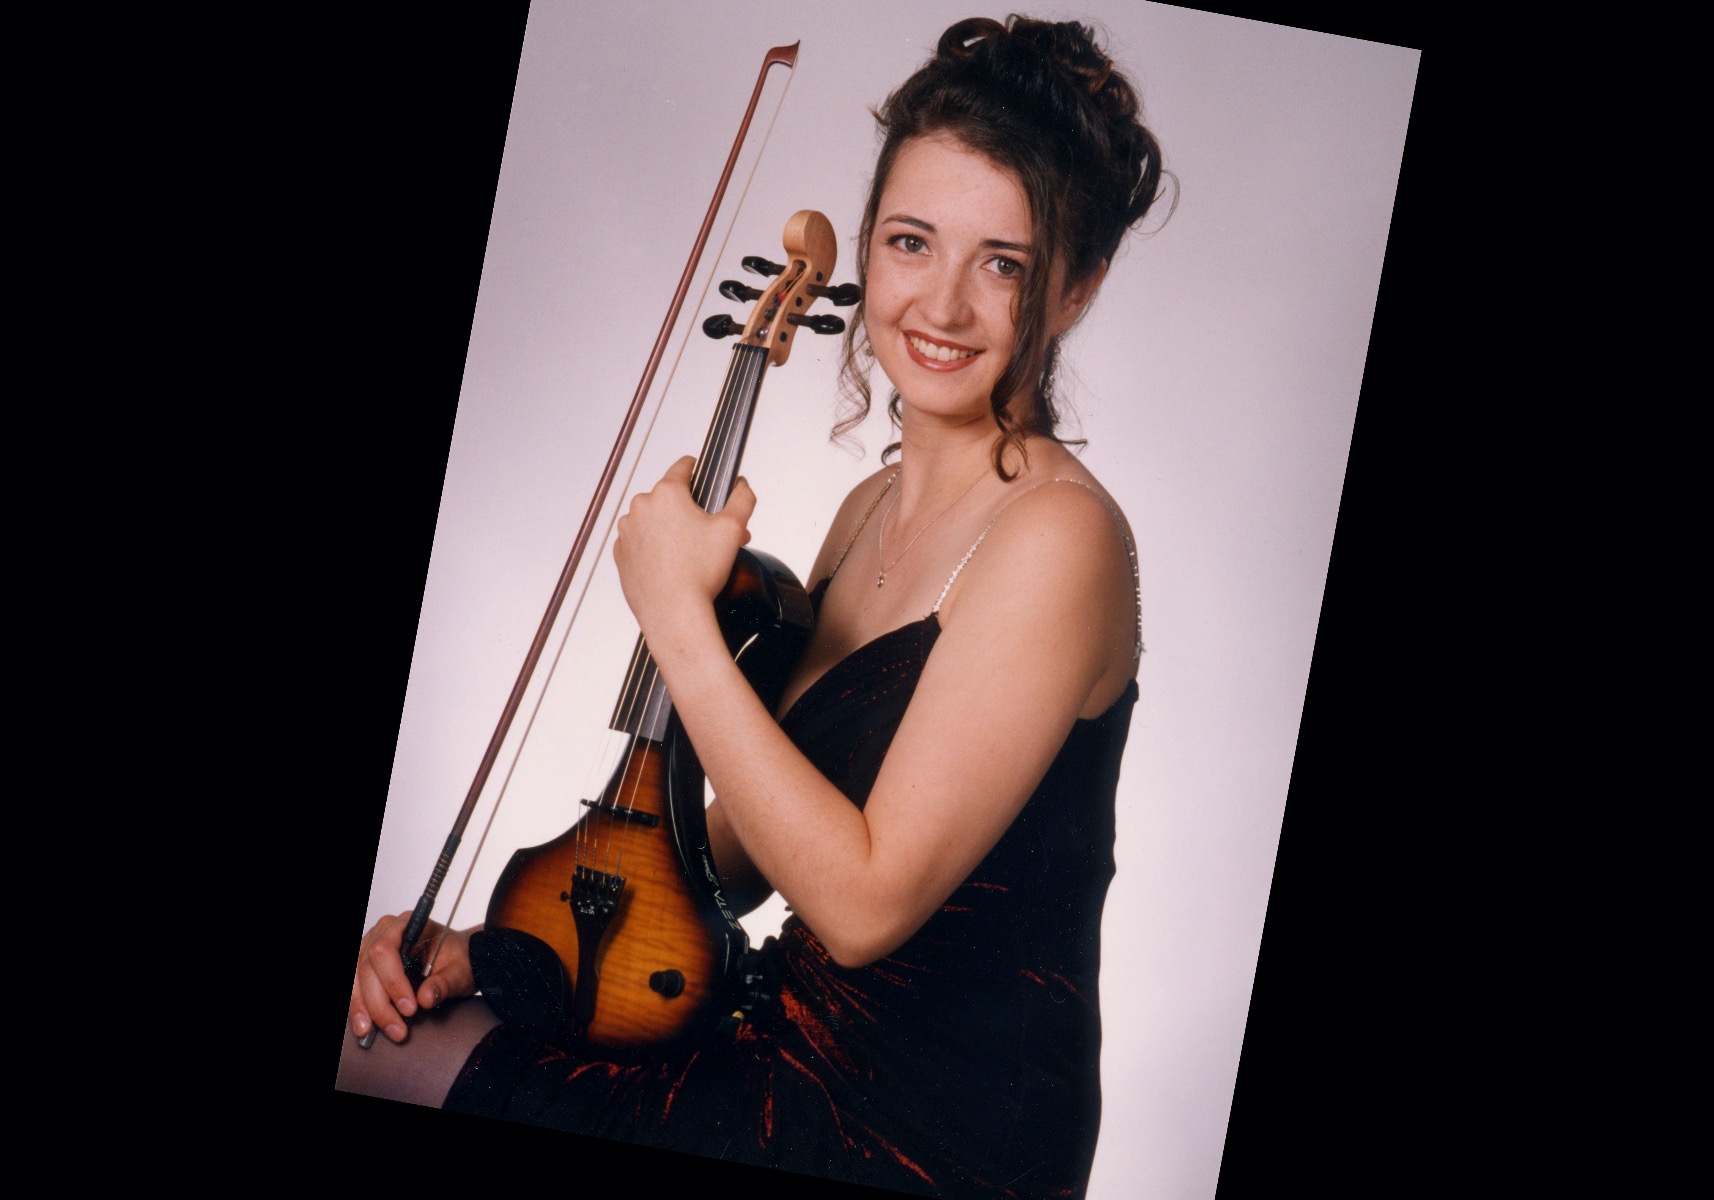 20 year old Rhiannon posed in a vintage formal dress, hair up, holding an electric violin